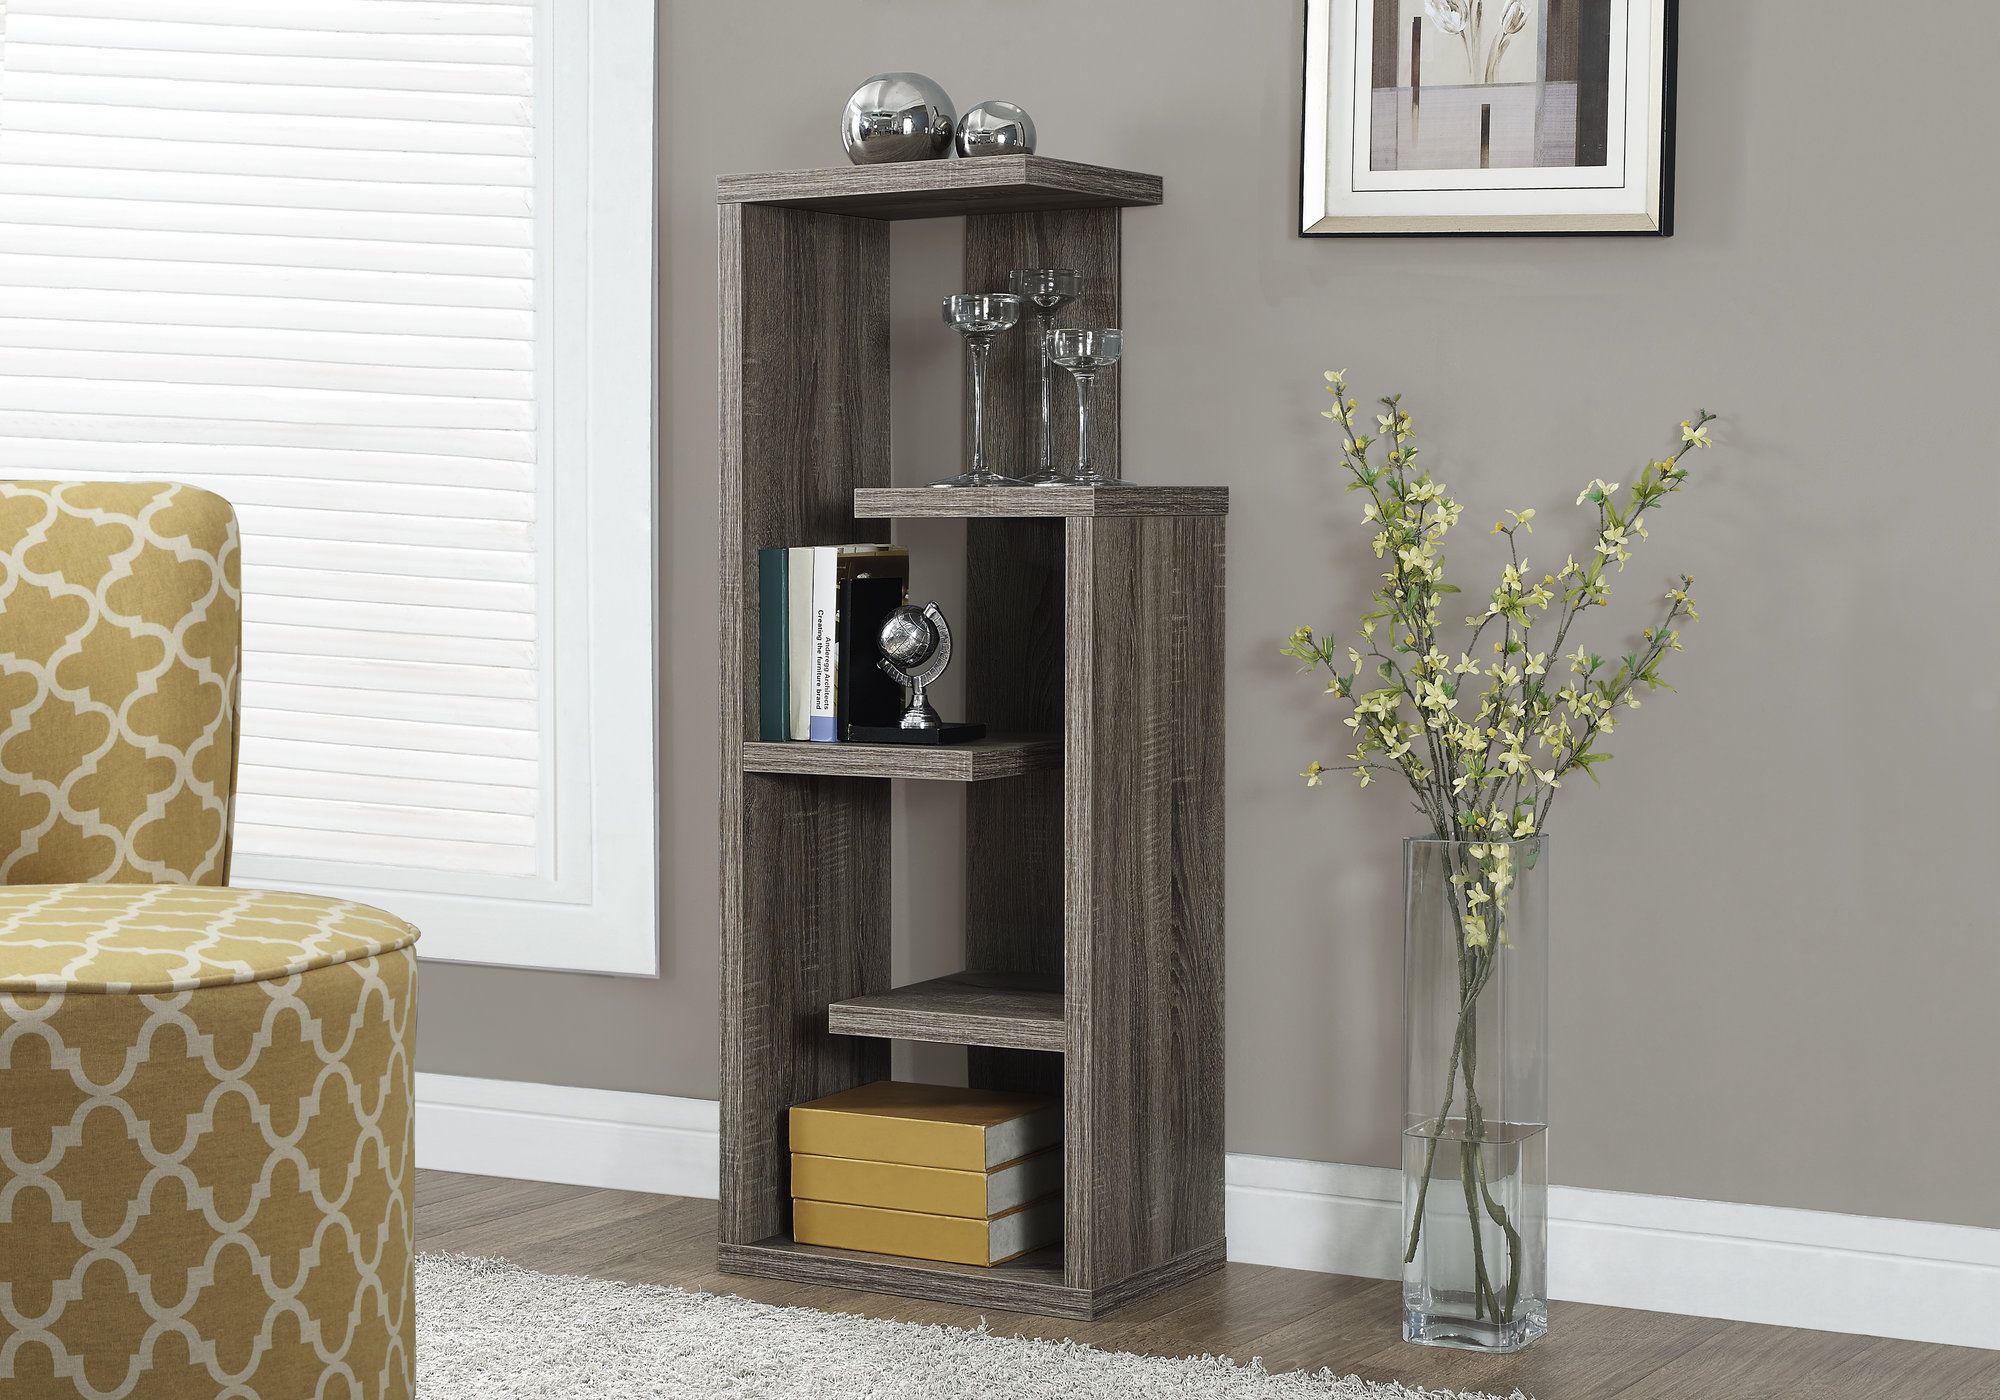 I 2467 - BOOKCASE - 48"H / DARK TAUPE ACCENT DISPLAY UNIT BY MONARCH SPECIALTIES INC